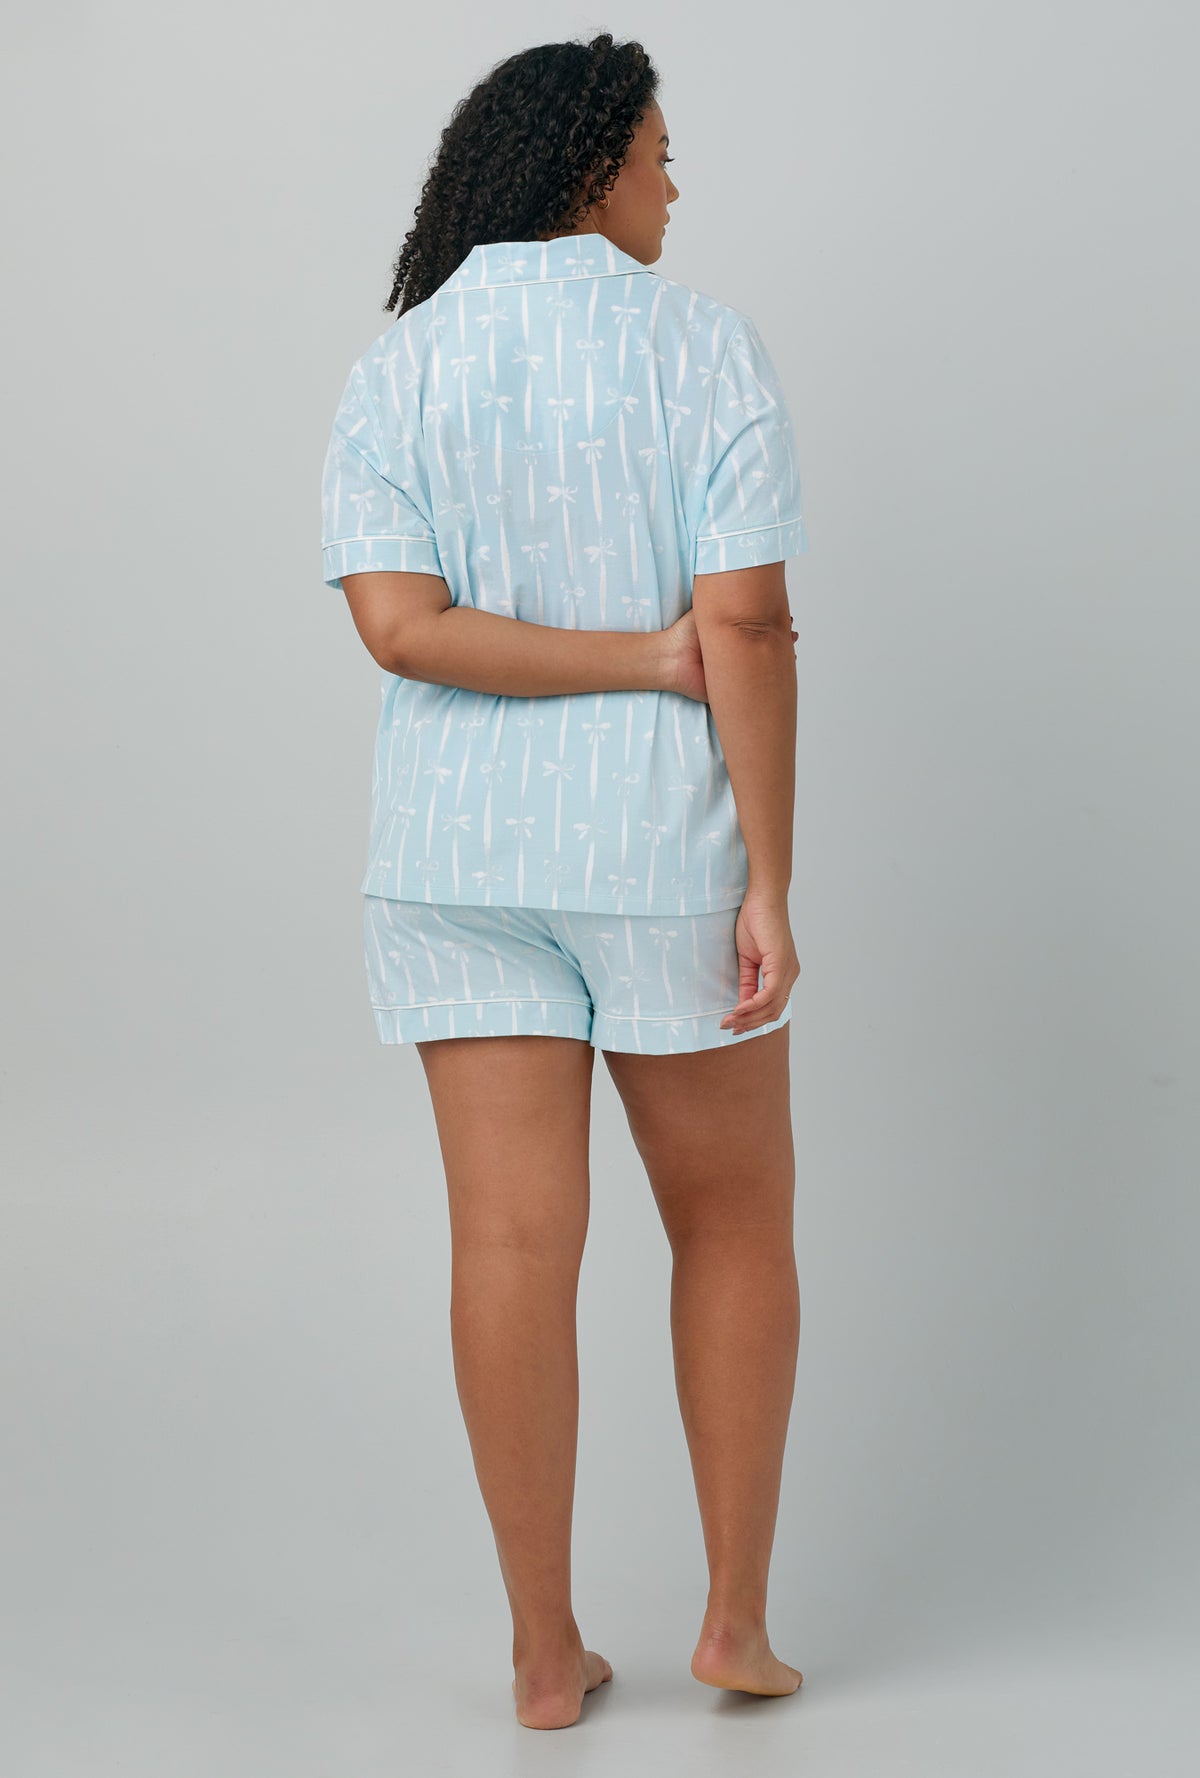 A lady wearing Short Sleeve Classic Shorty Stretch Jersey PJ Set with tying the knot print